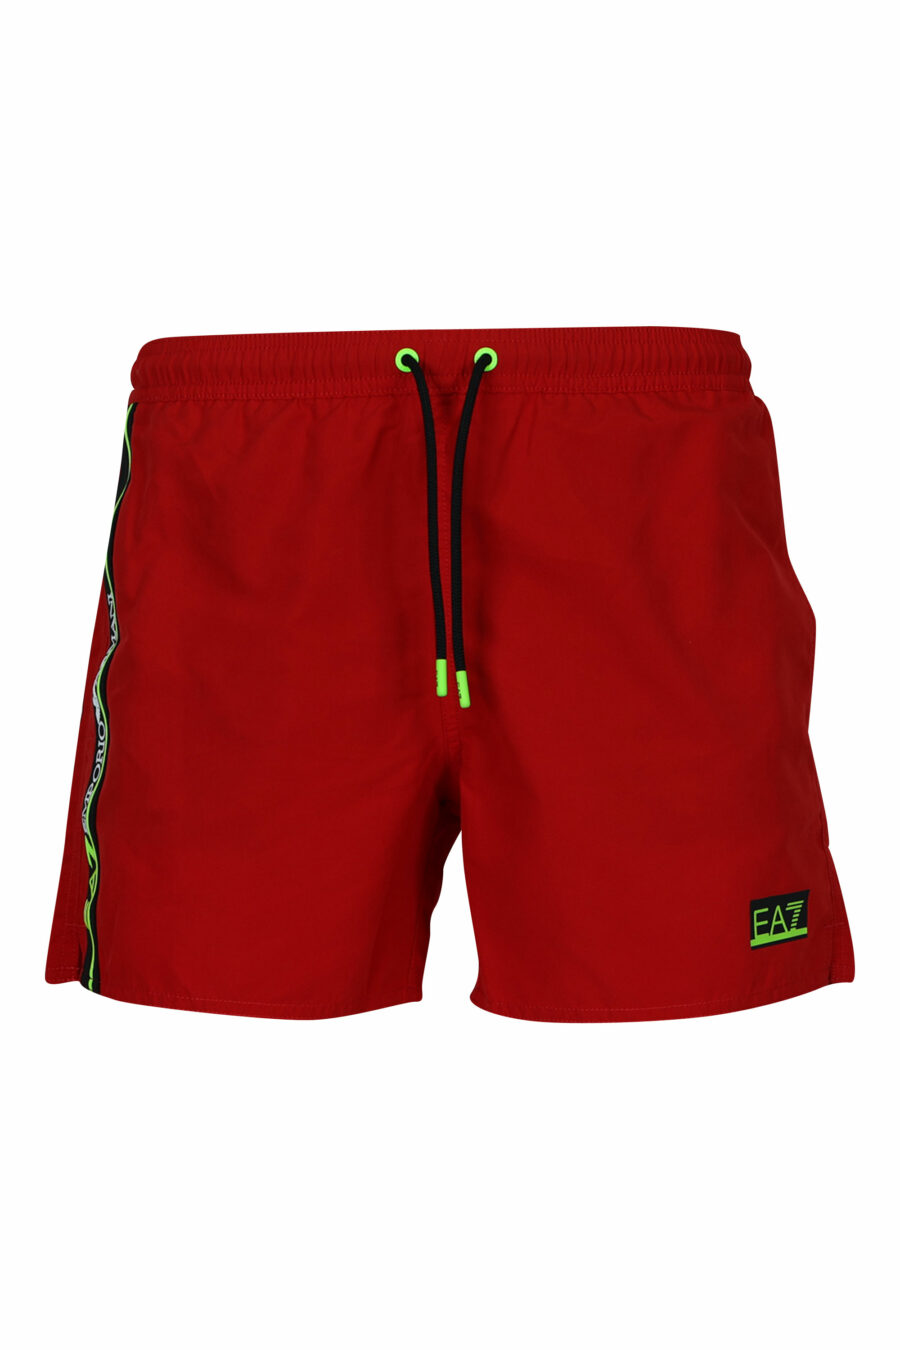 Red swimming costume with side "lux identity" maxilogo with lime green line - 8058947151806